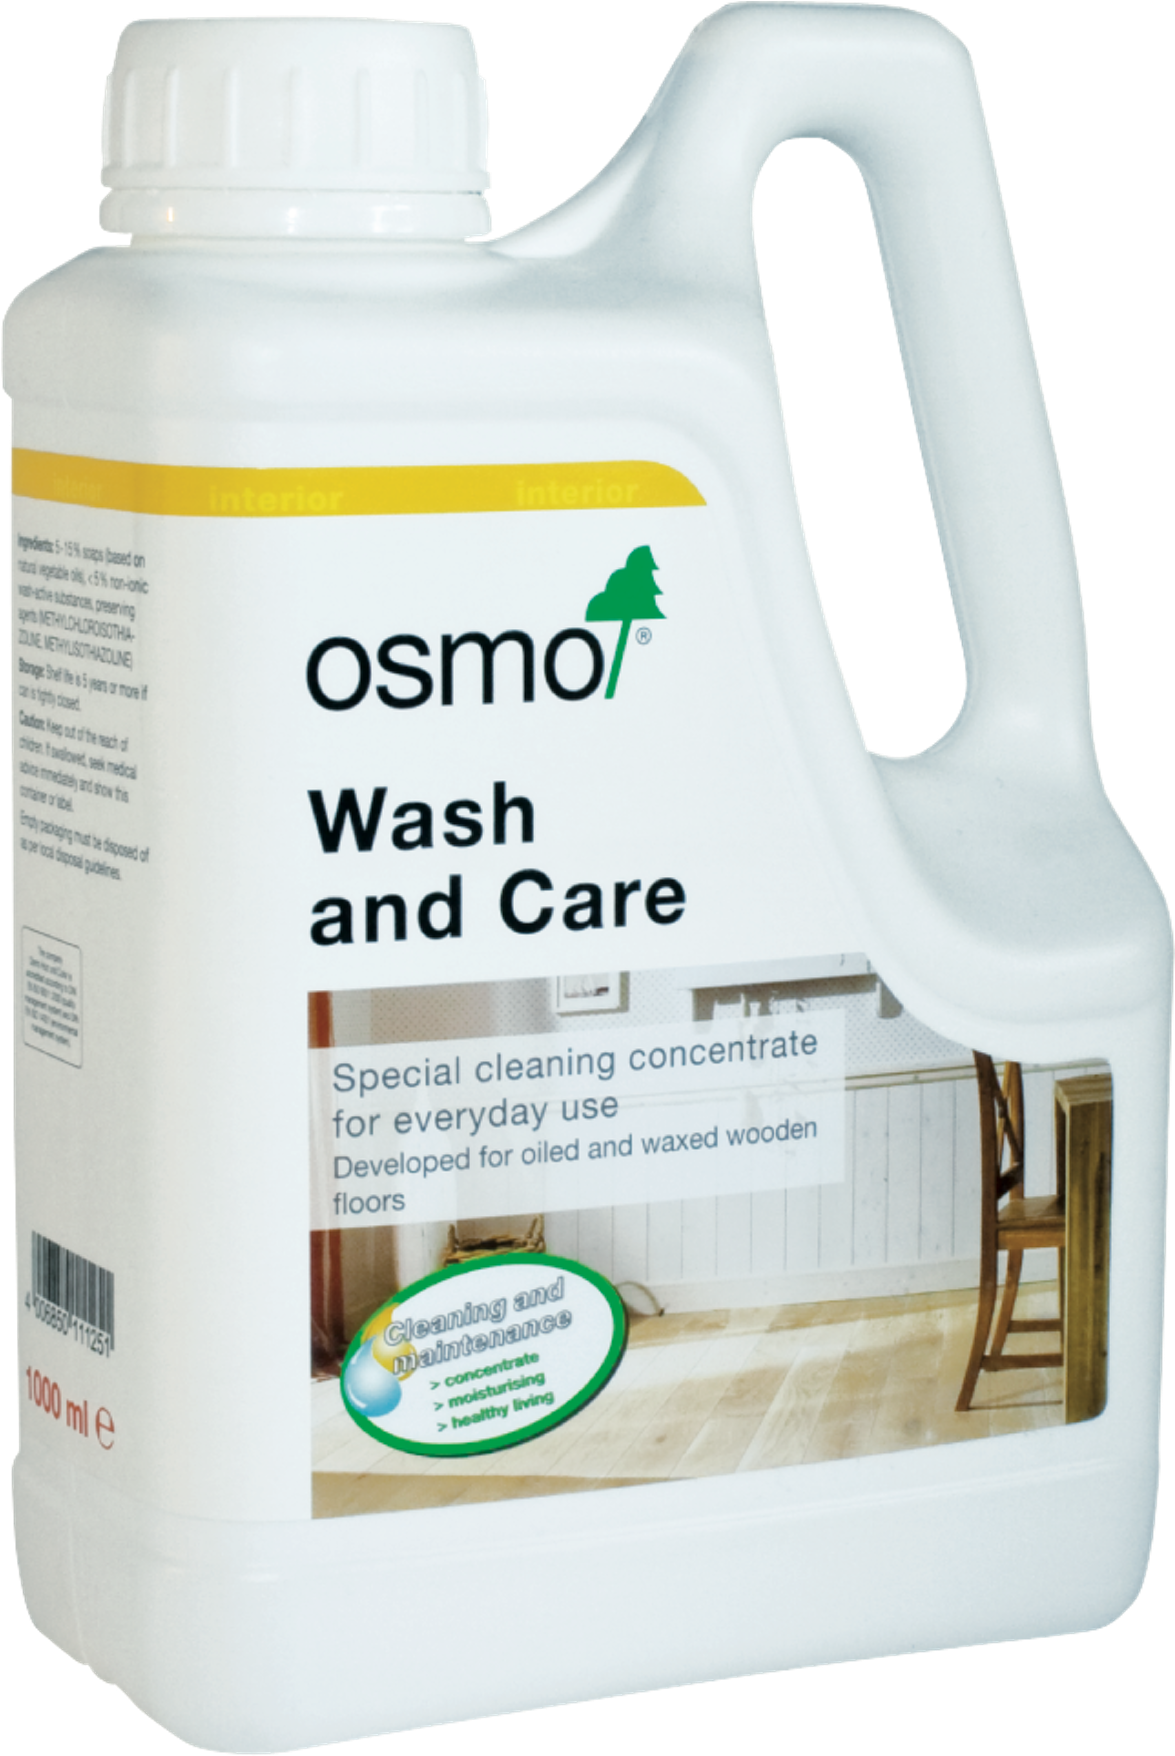 Https - - Ssl - Cf3 - Rackcdn - Com/ - Osmo Wash And Care (2000x2000), Png Download